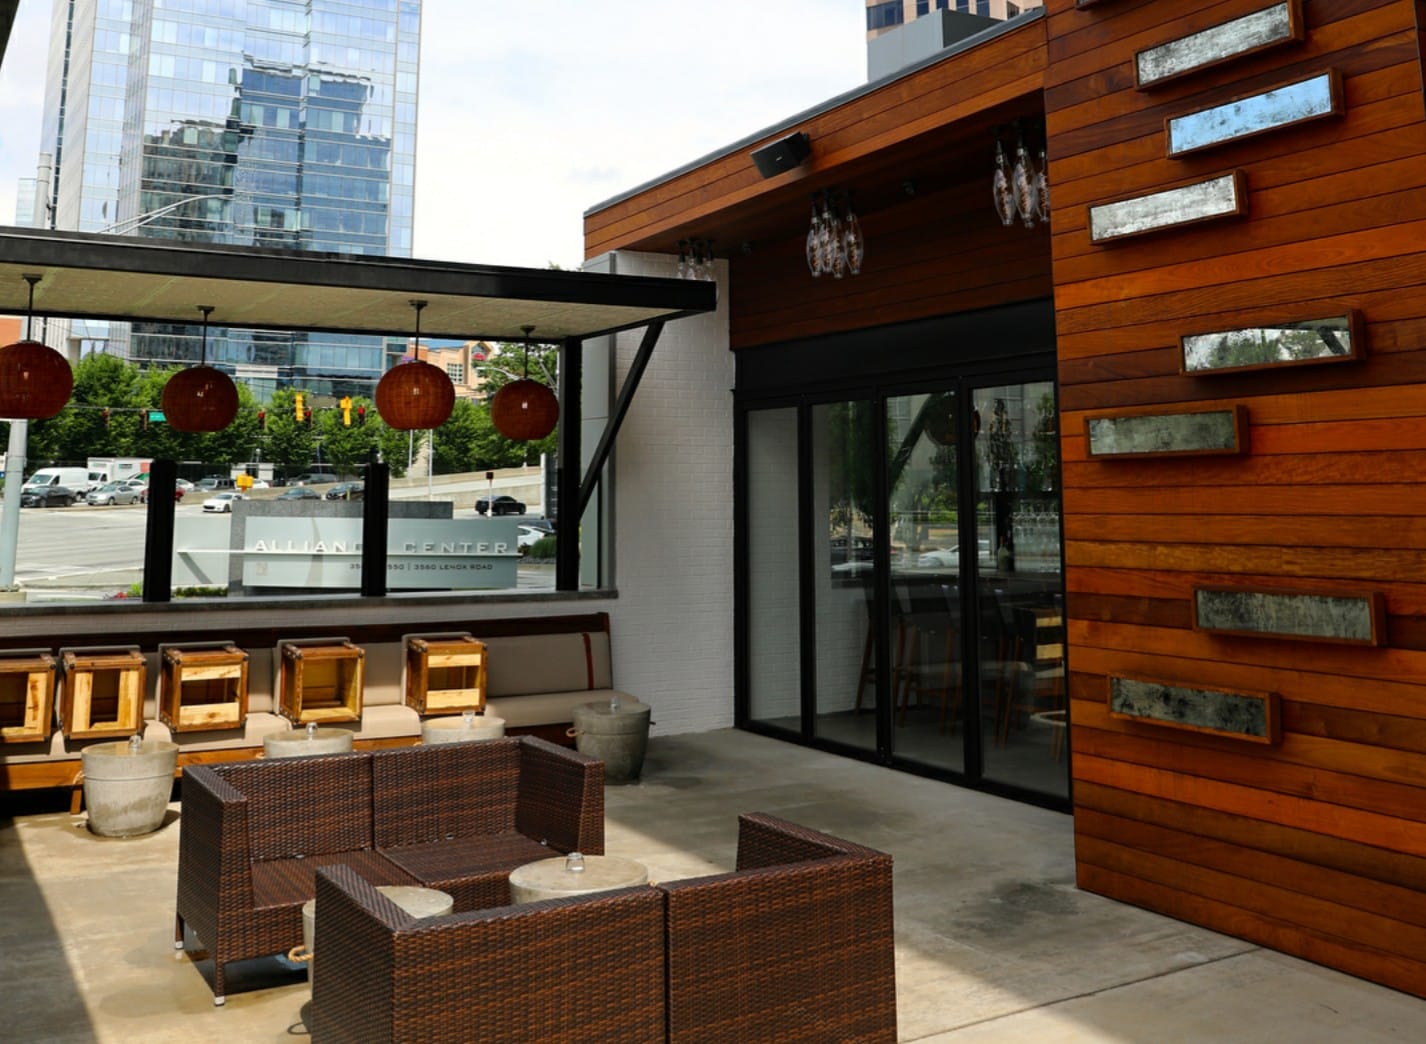 The outdoor patio with two couches, bar seating, and a wood wall with flower boxes at Little Alley Steak Buckhead, Atlanta